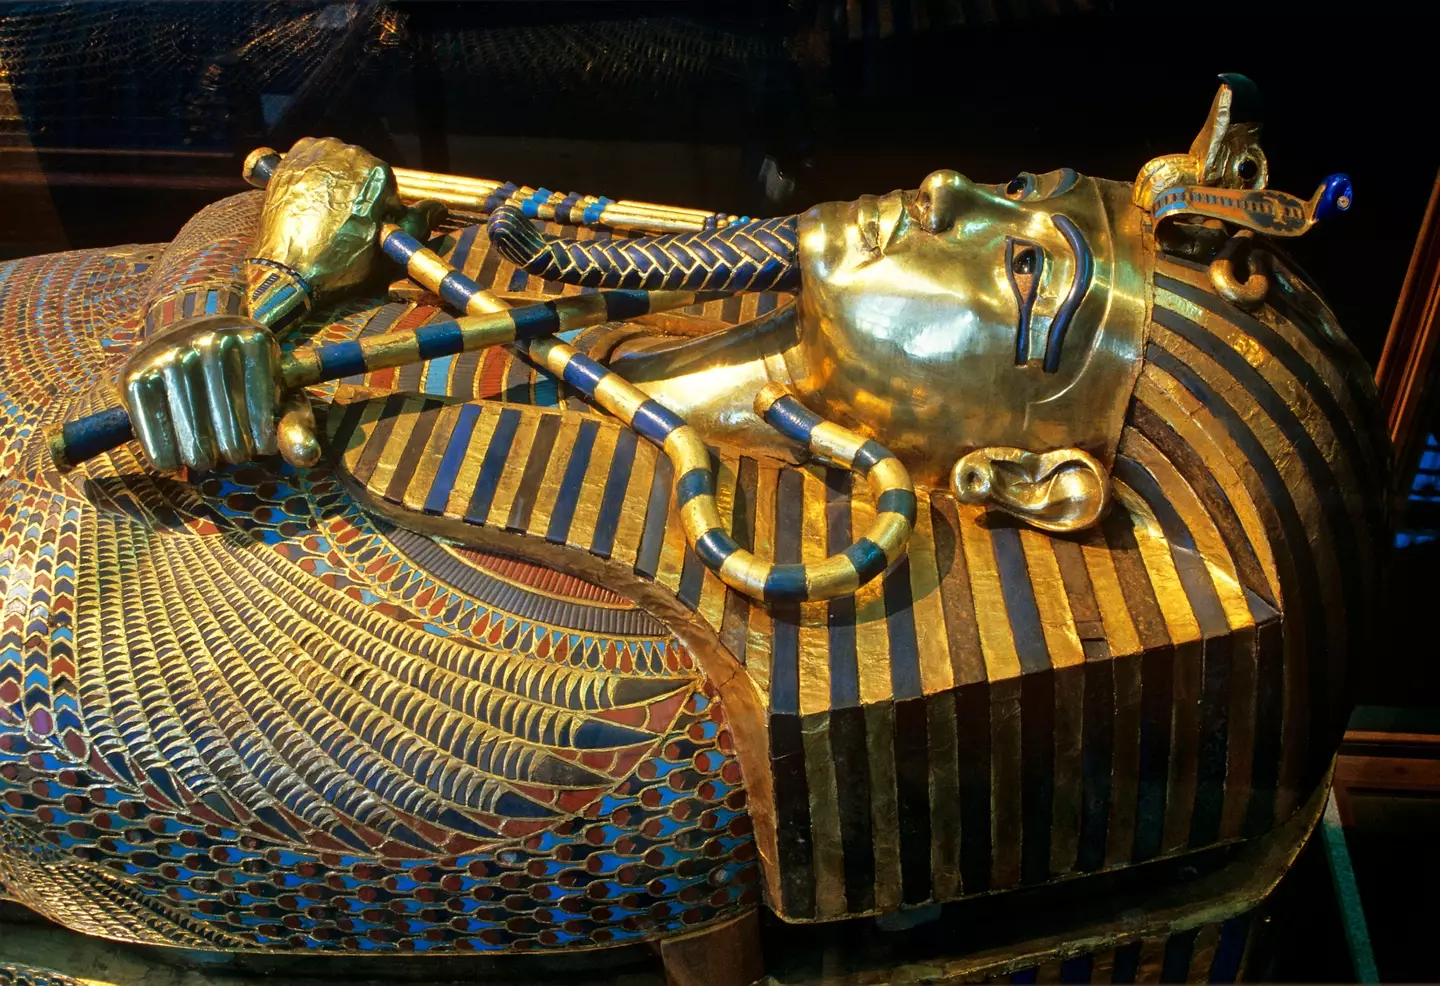 The tomb of Tutankhamun, which was discovered just three years before his dagger.